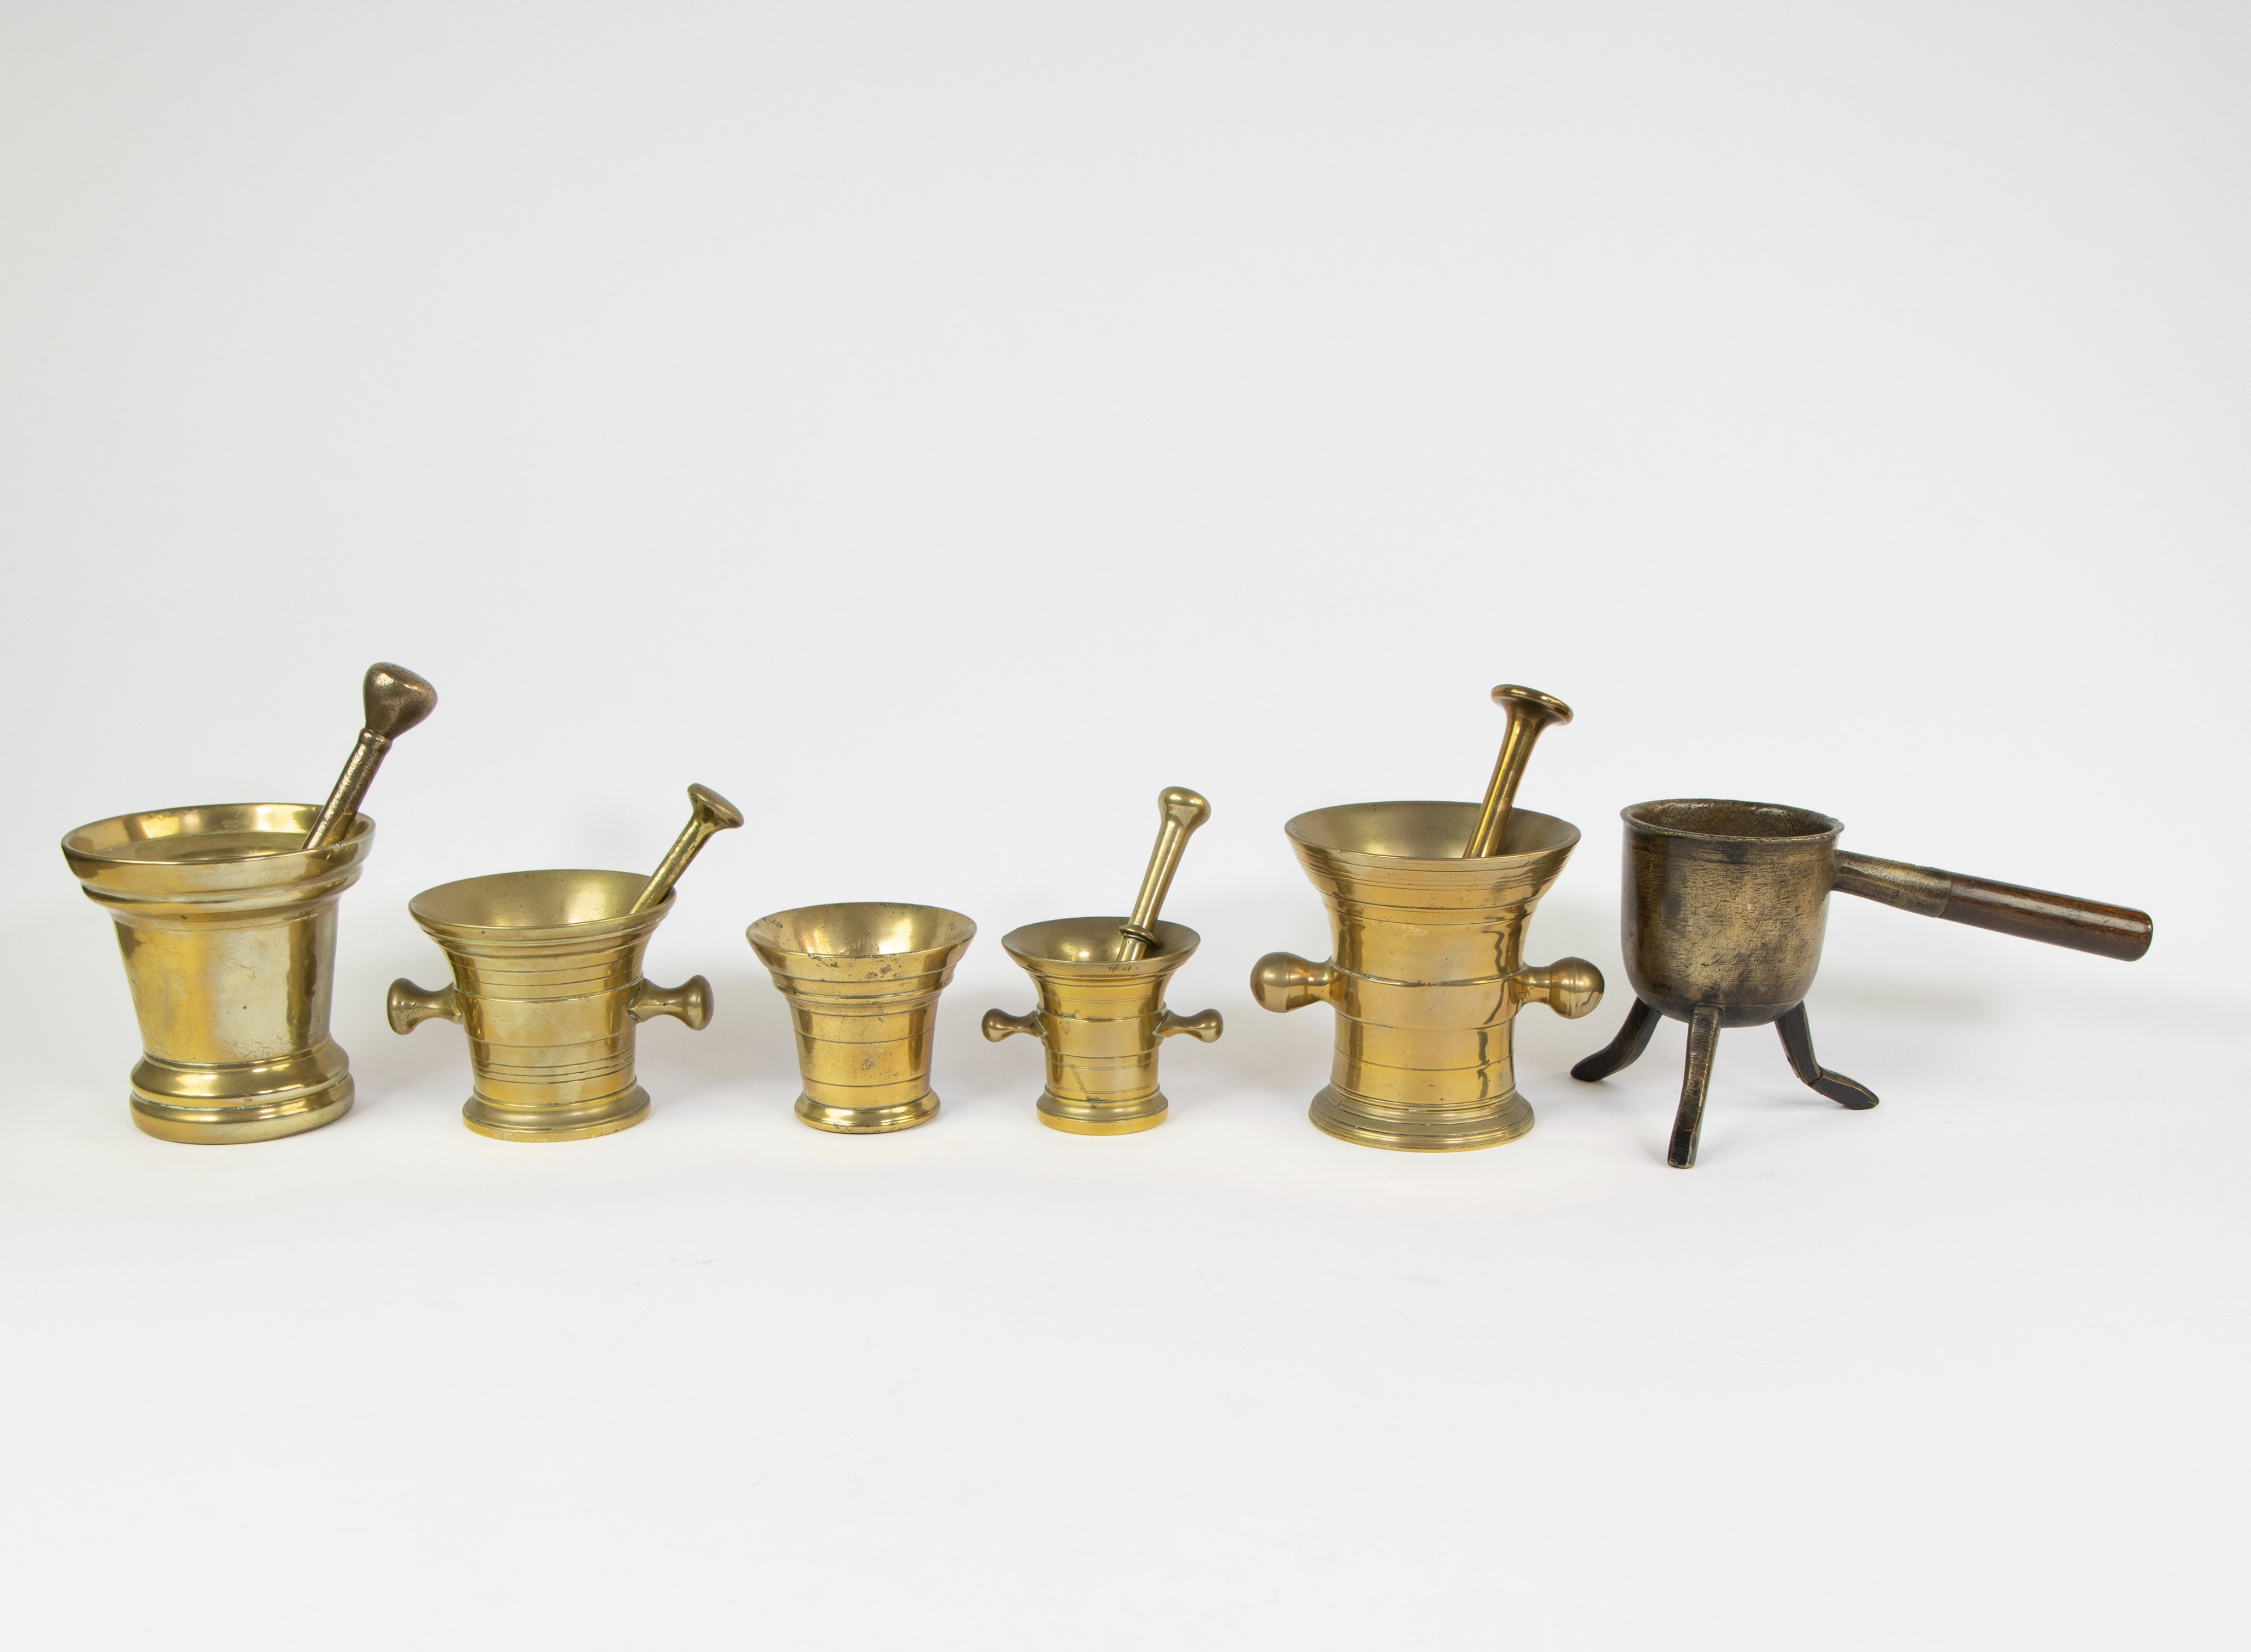 Collection of mortars, pestles and a melting pot